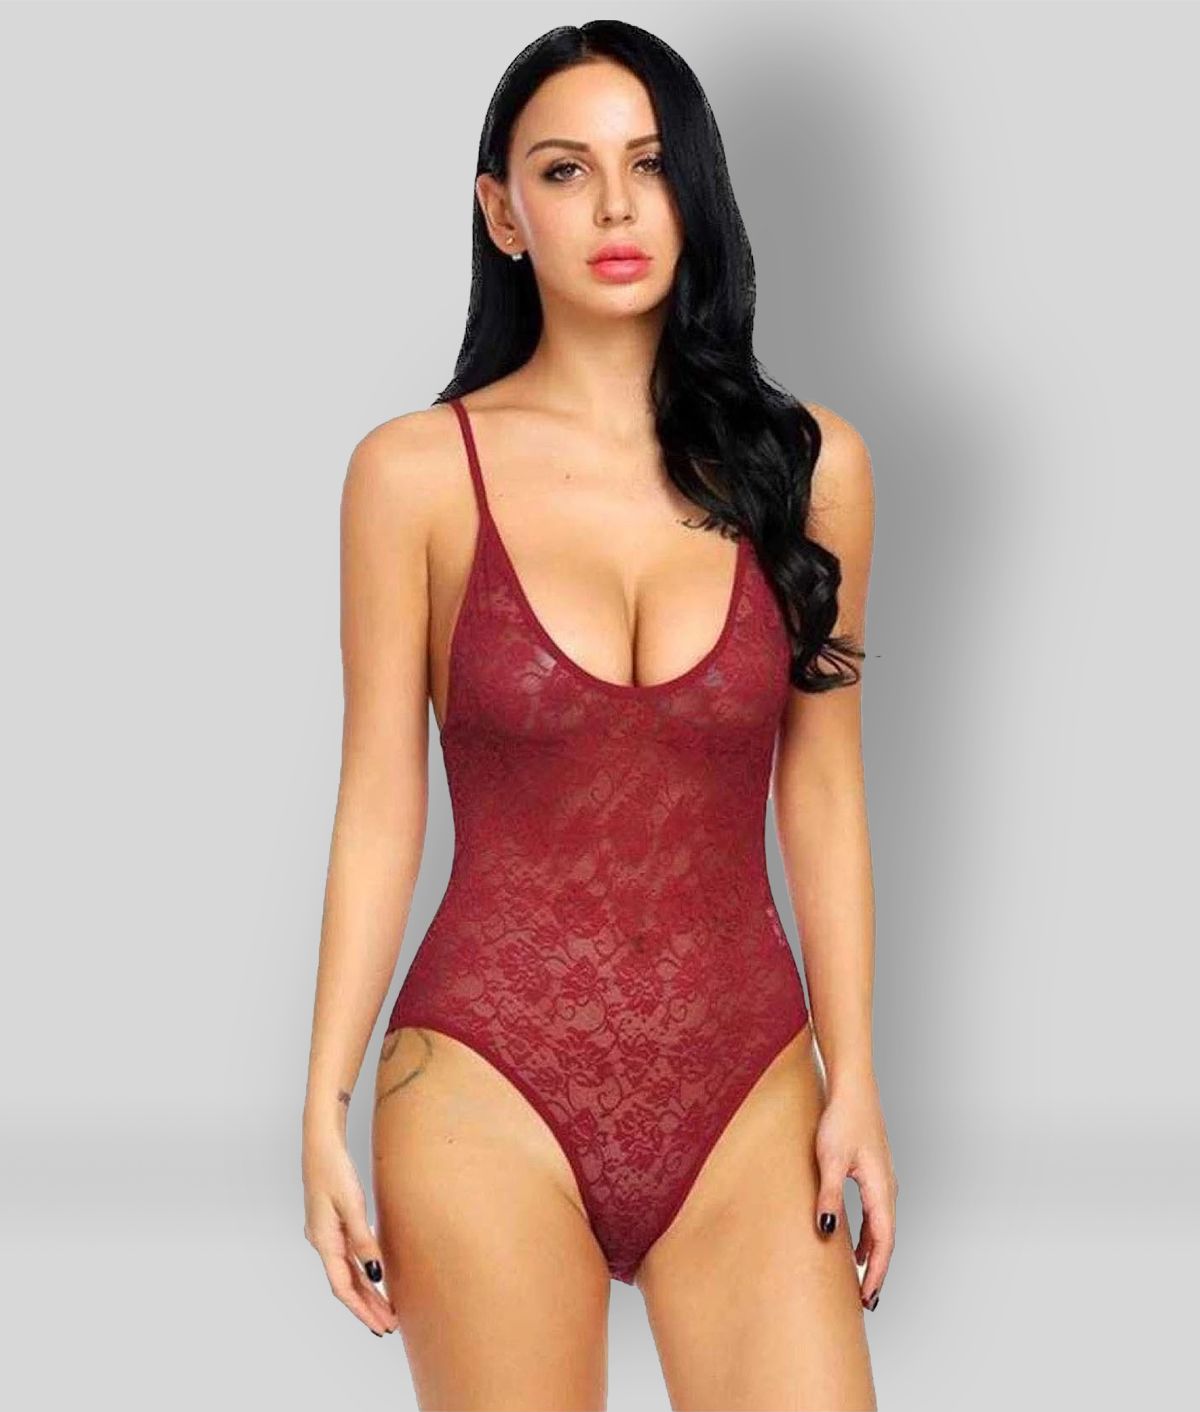     			Celosia - Maroon Lace Women's Nightwear Baby Doll Dresses Without Panty ( Pack of 1 )